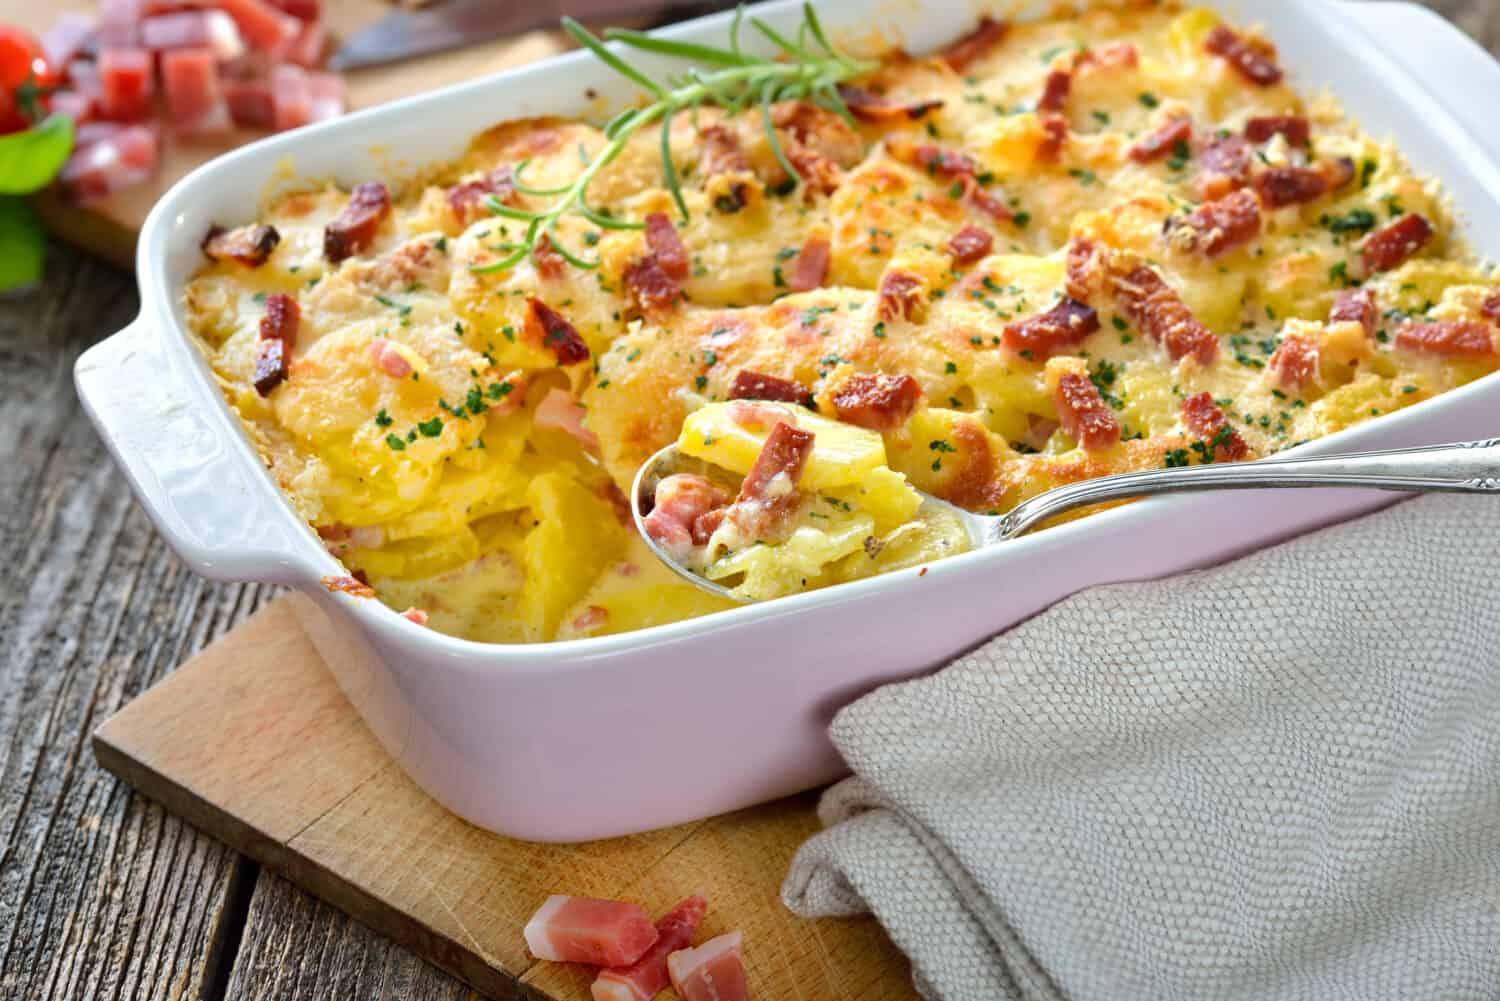 Hearty potato gratin with parmesan cheese, cream and delicious cured bacon from South Tyrol freshly served from the oven on a wooden table